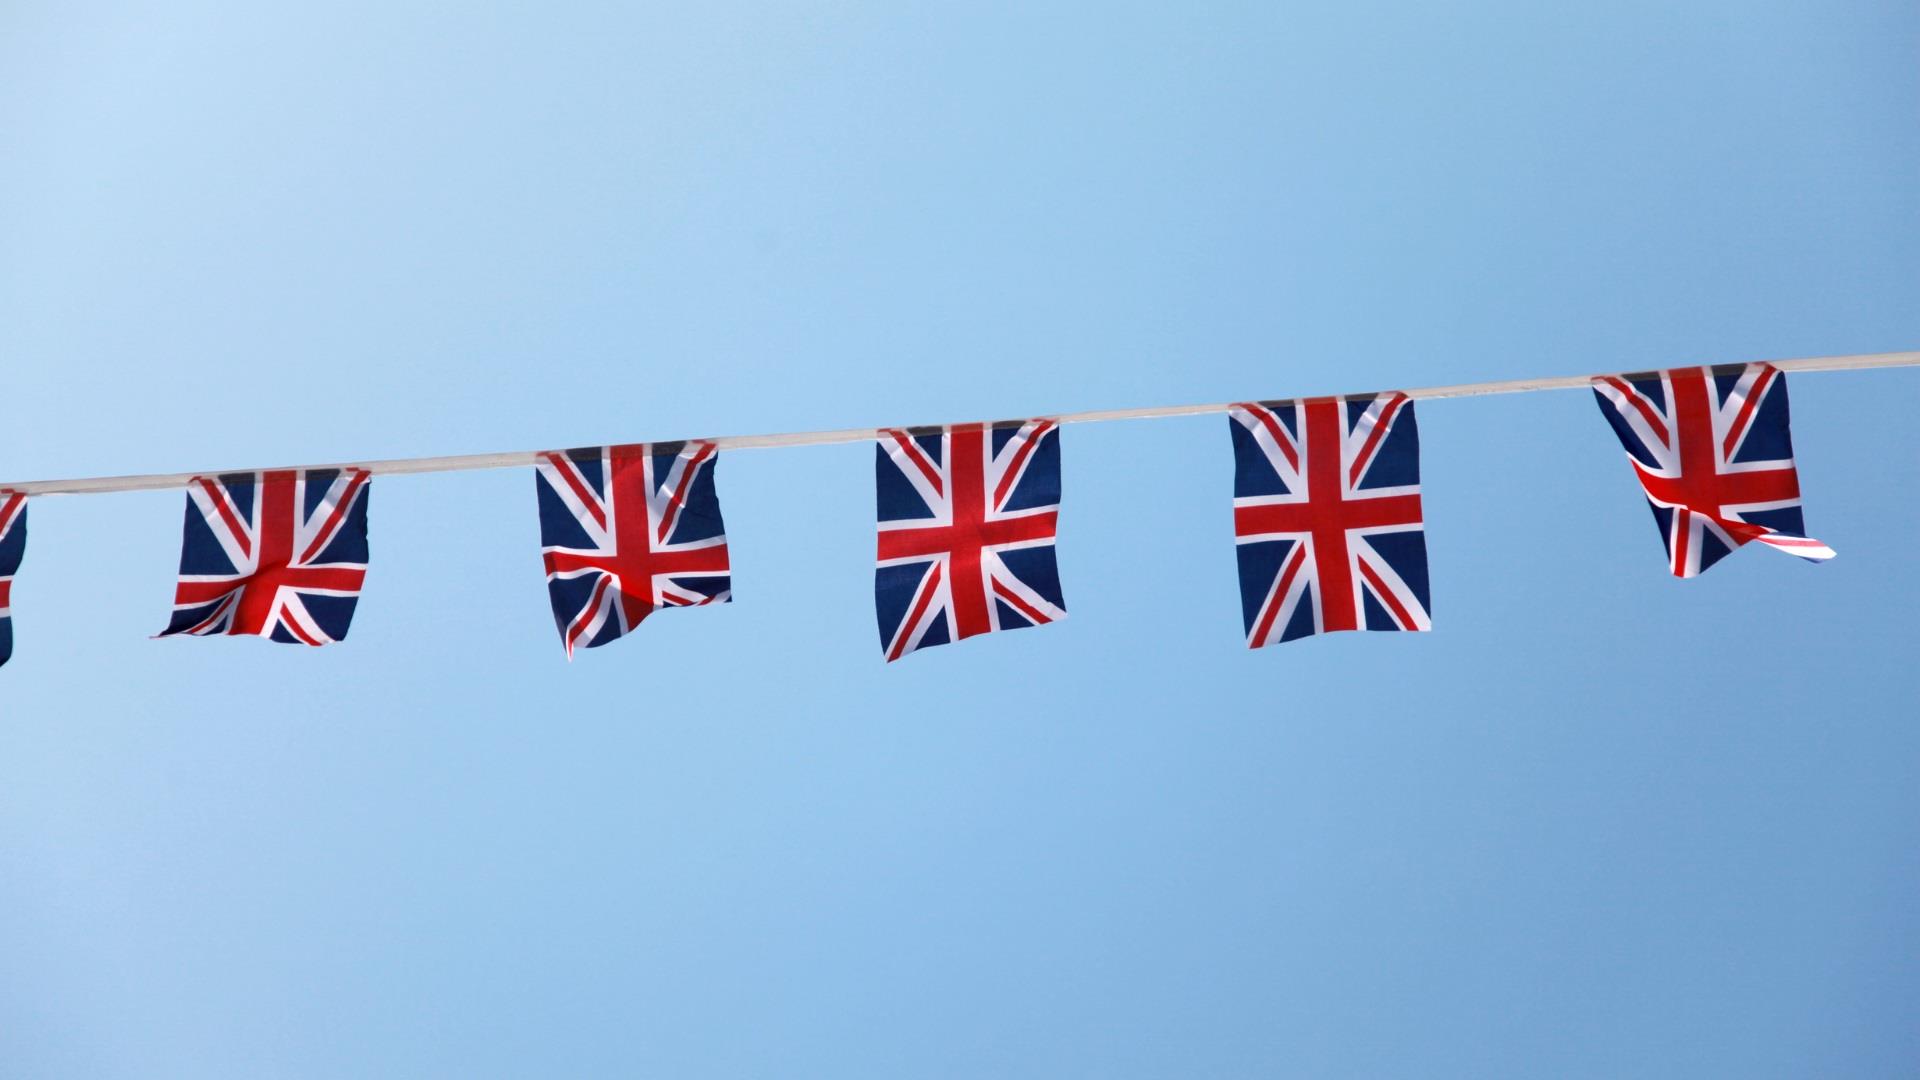 Union Jack Bunting flying in the blue sky